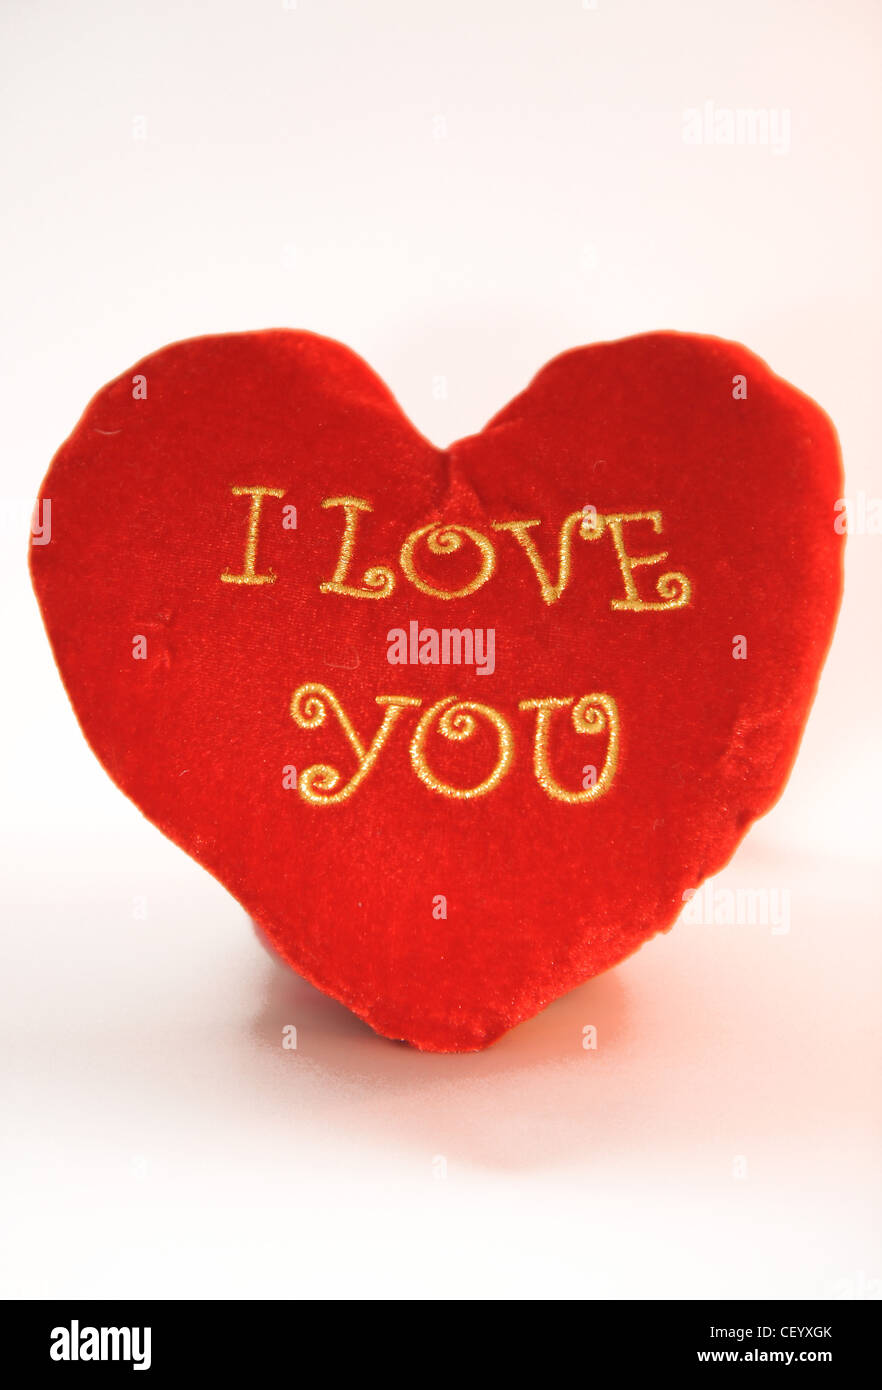 Still life image of a red heart shaped cushion with I Love You written on it Stock Photo